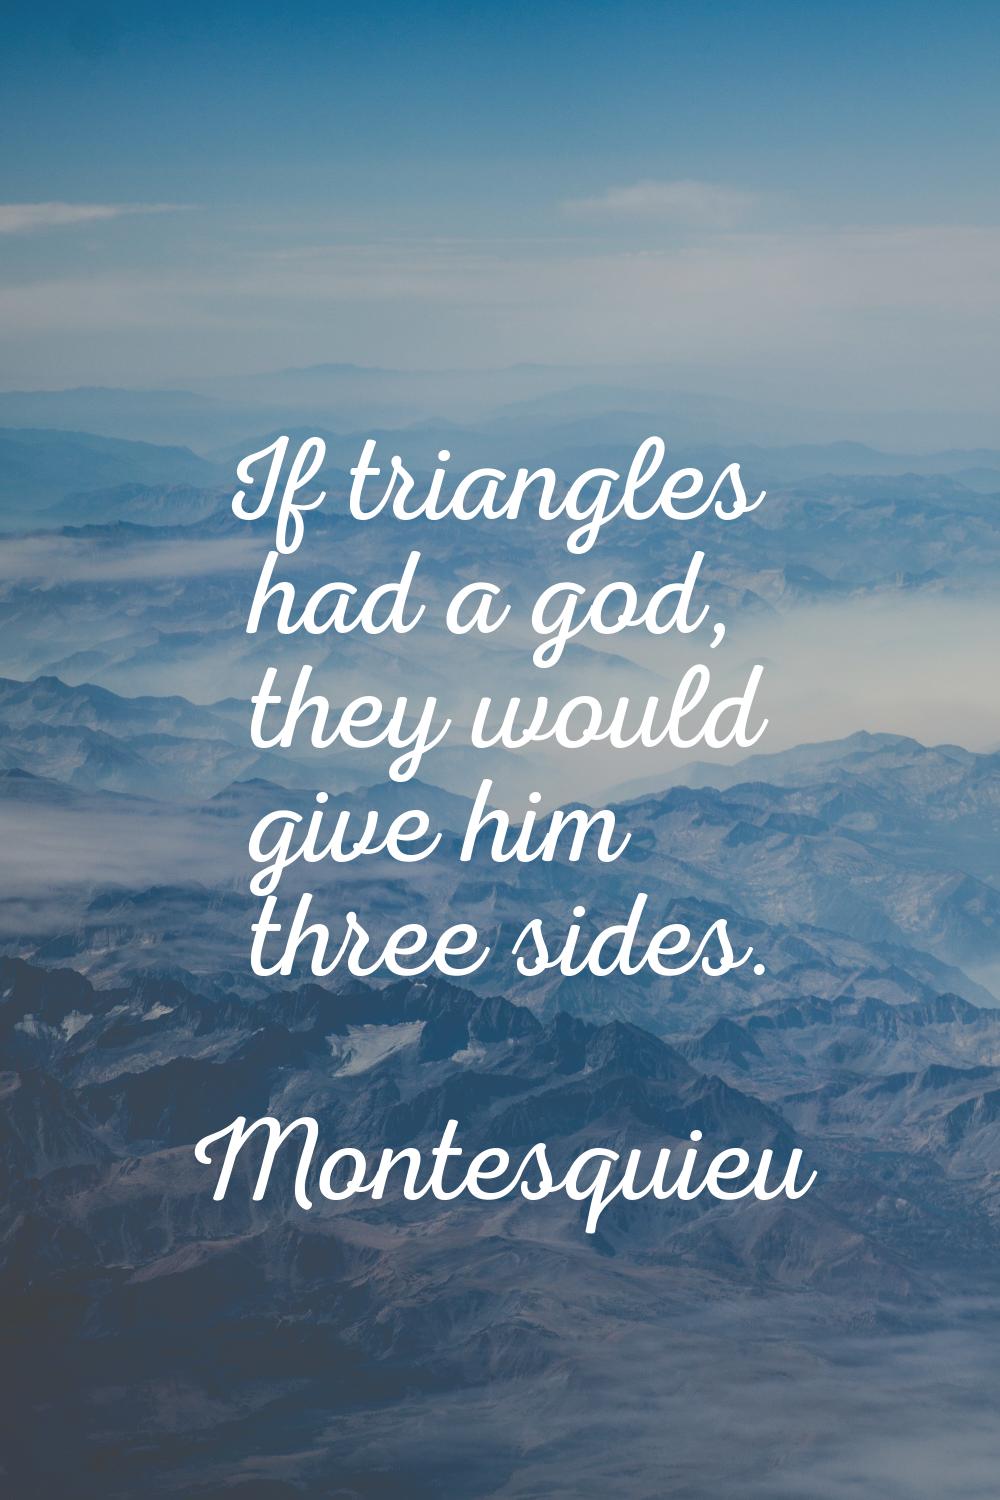 If triangles had a god, they would give him three sides.